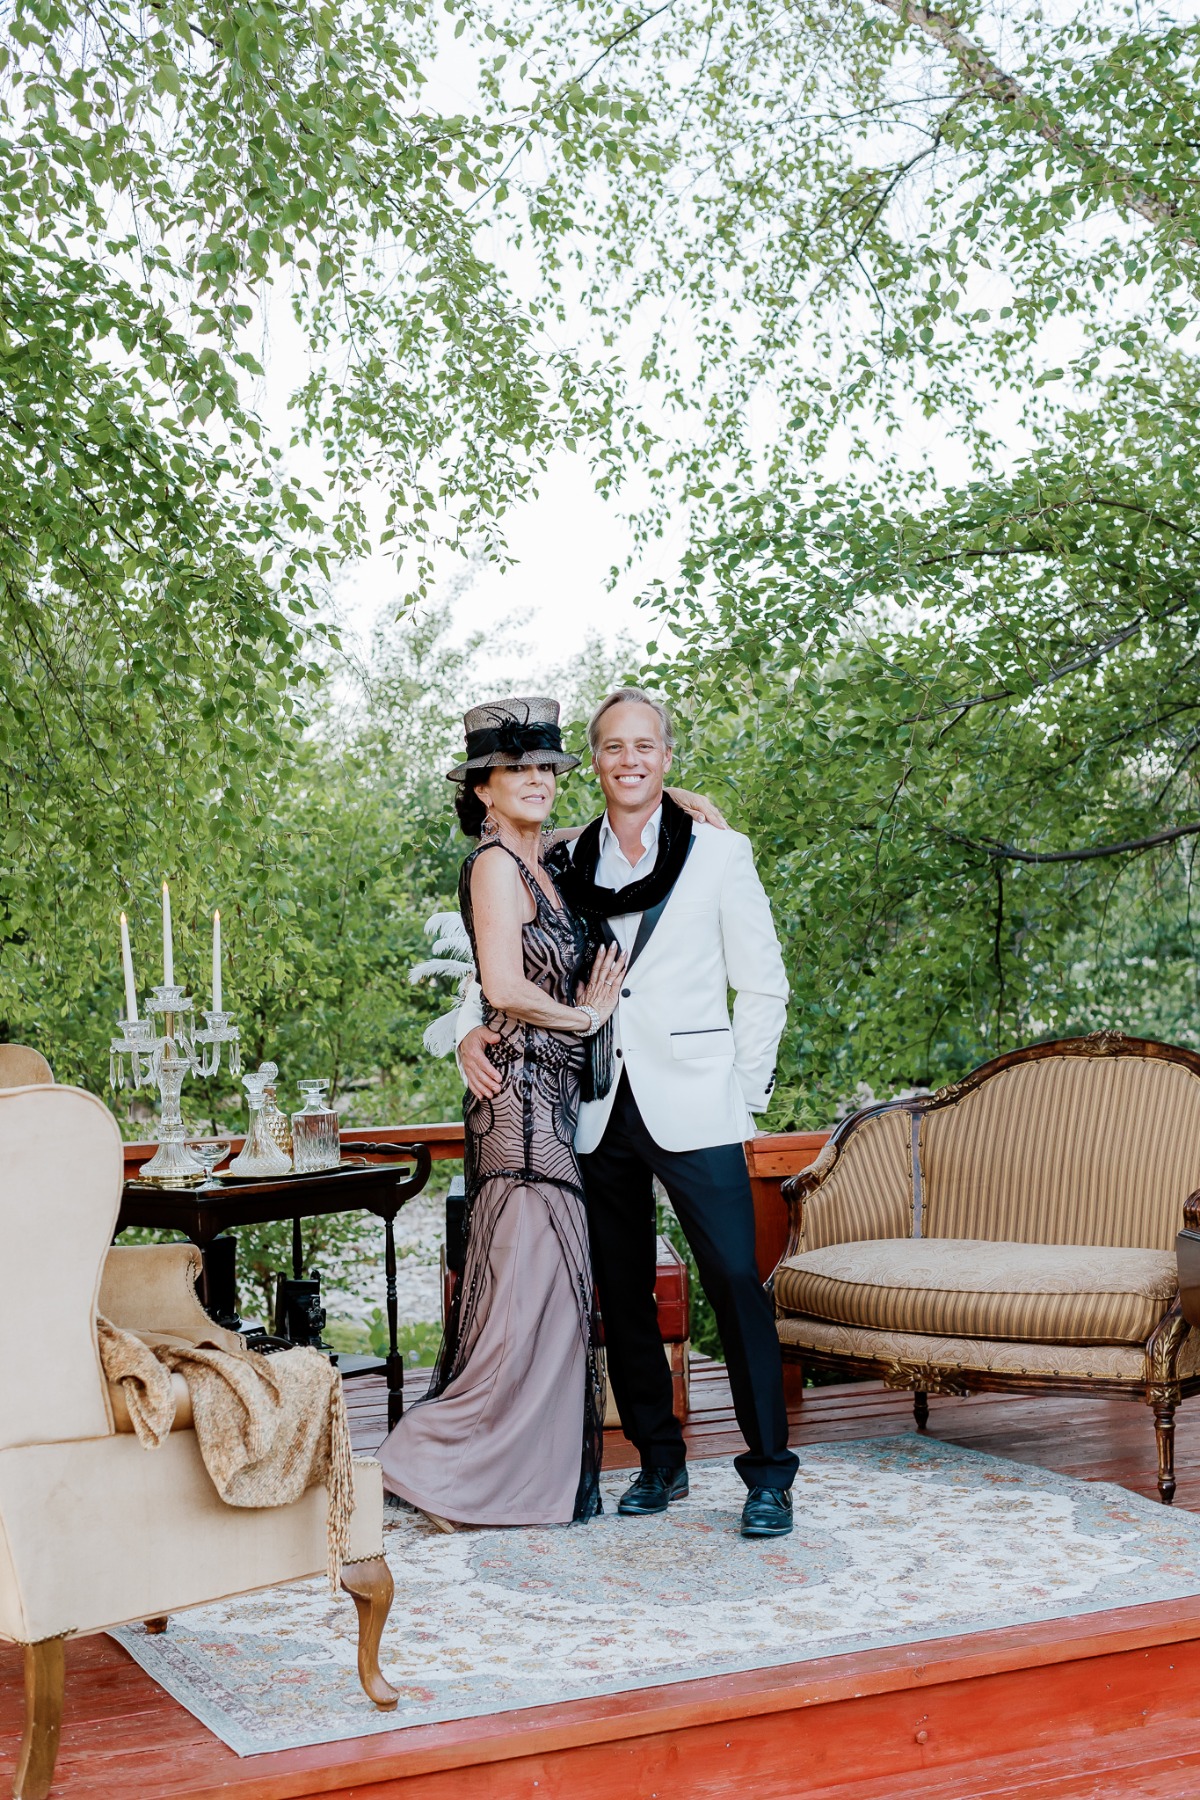 A Roaring 20's Themed Vow Renewal